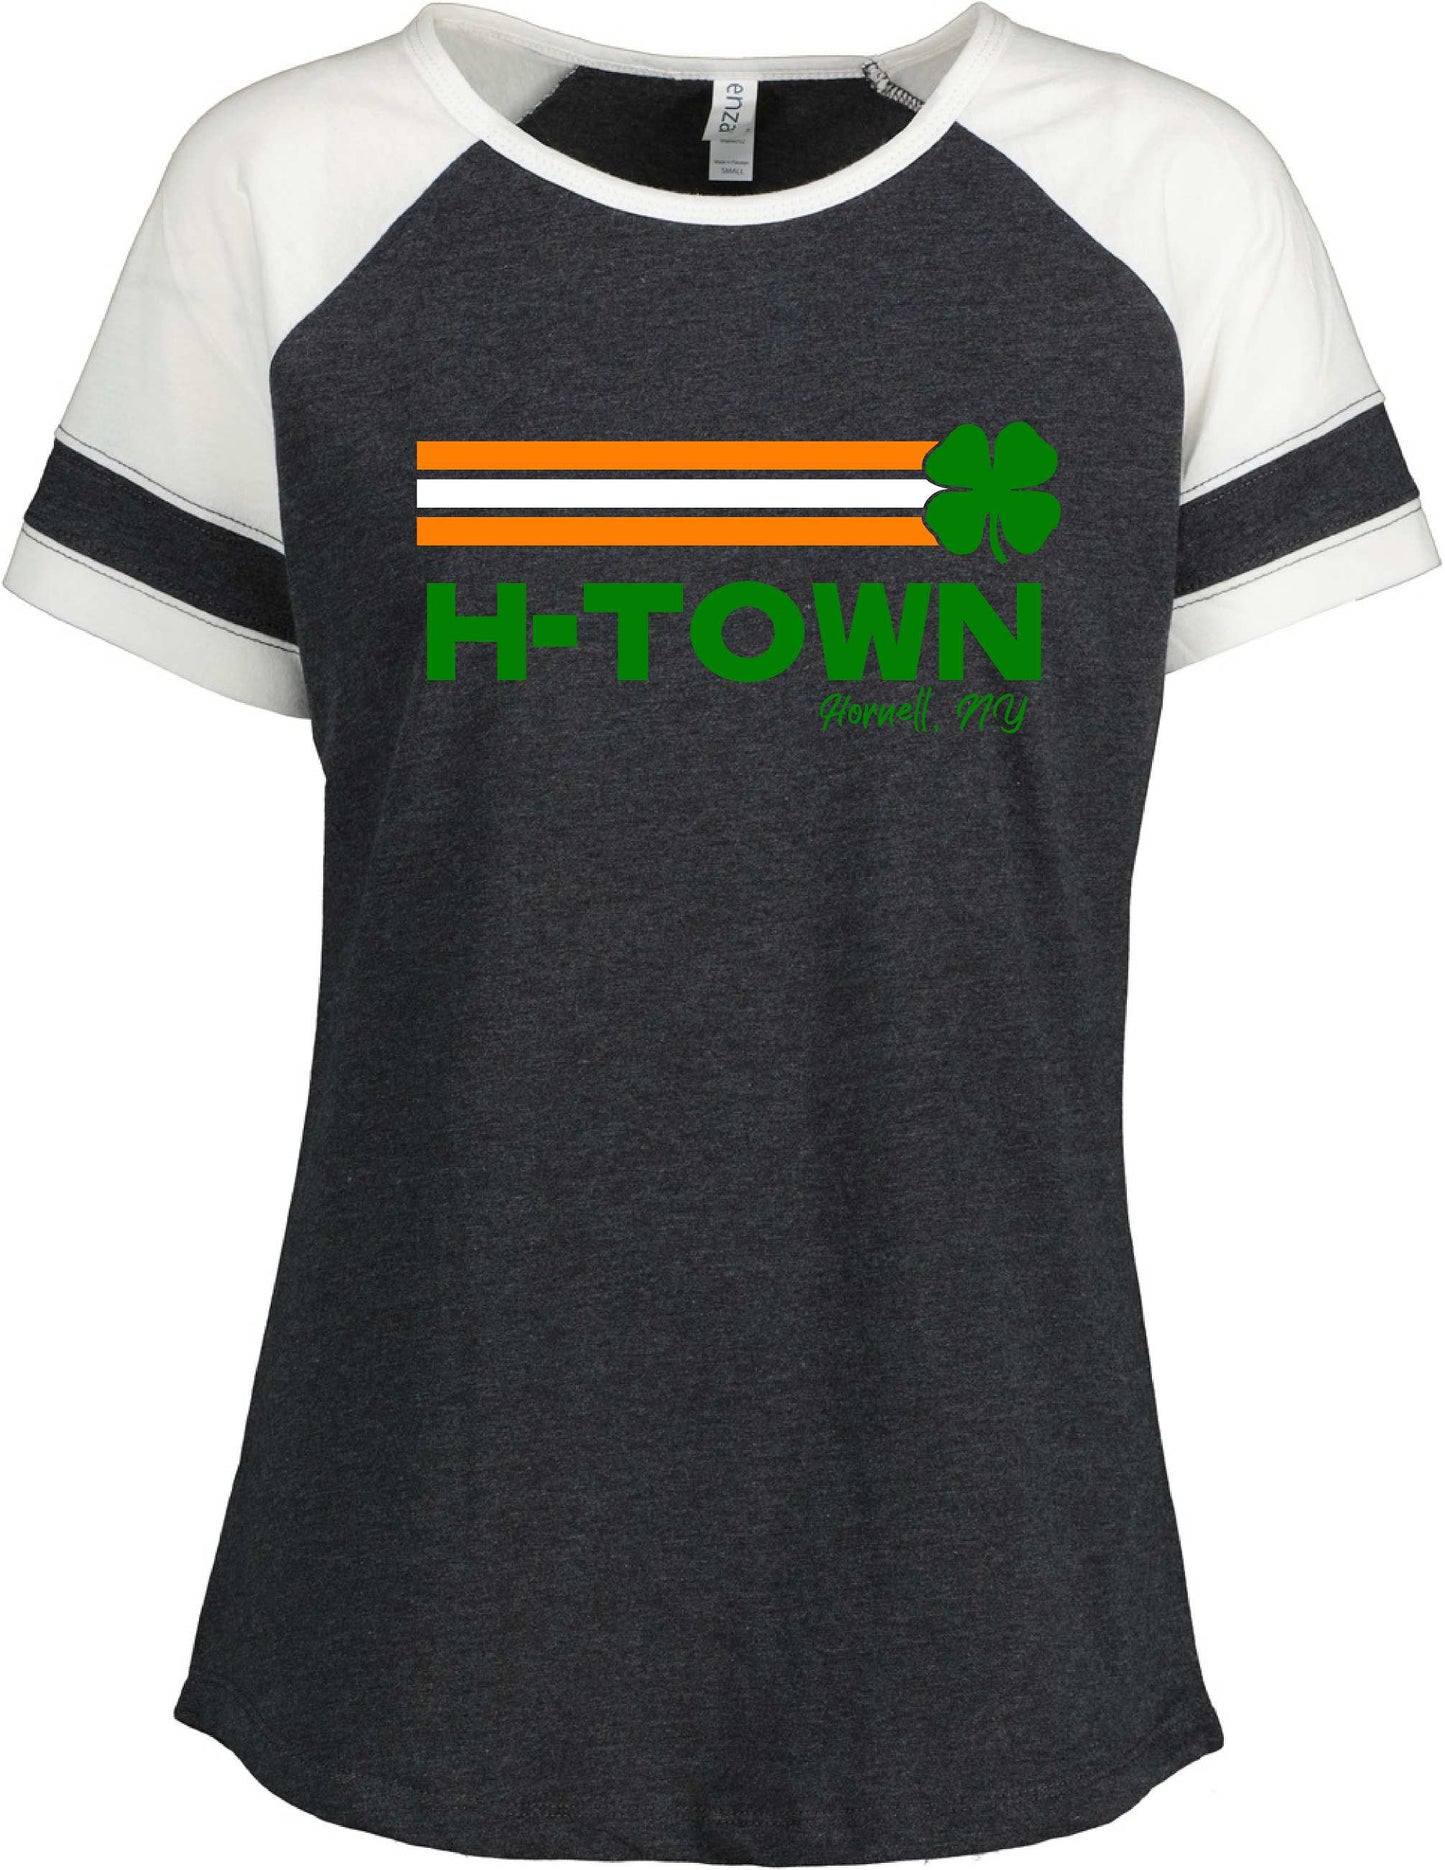 Hornell H Town St Patrick's Day EZ146 Enza Ladies Jersey Colorblock Tee